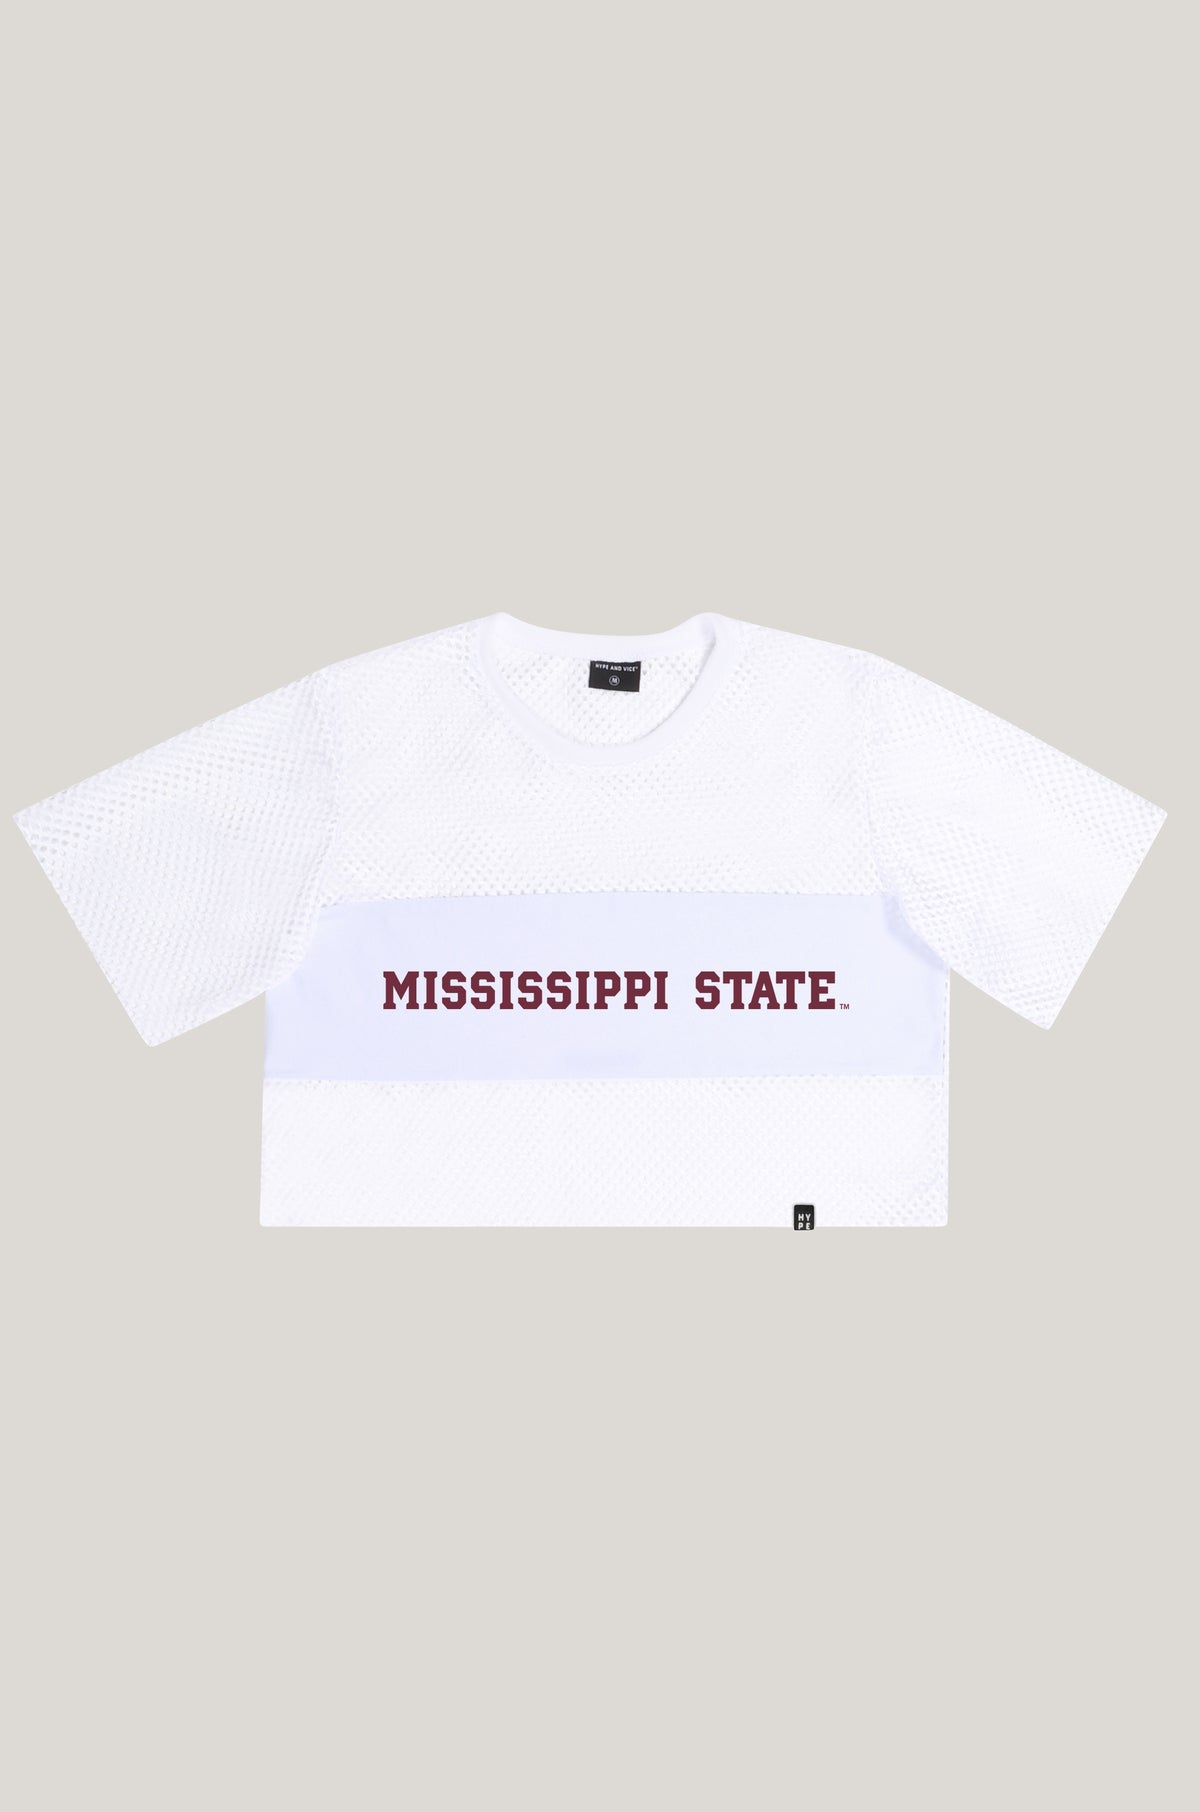 Mississippi State Mesh Tee